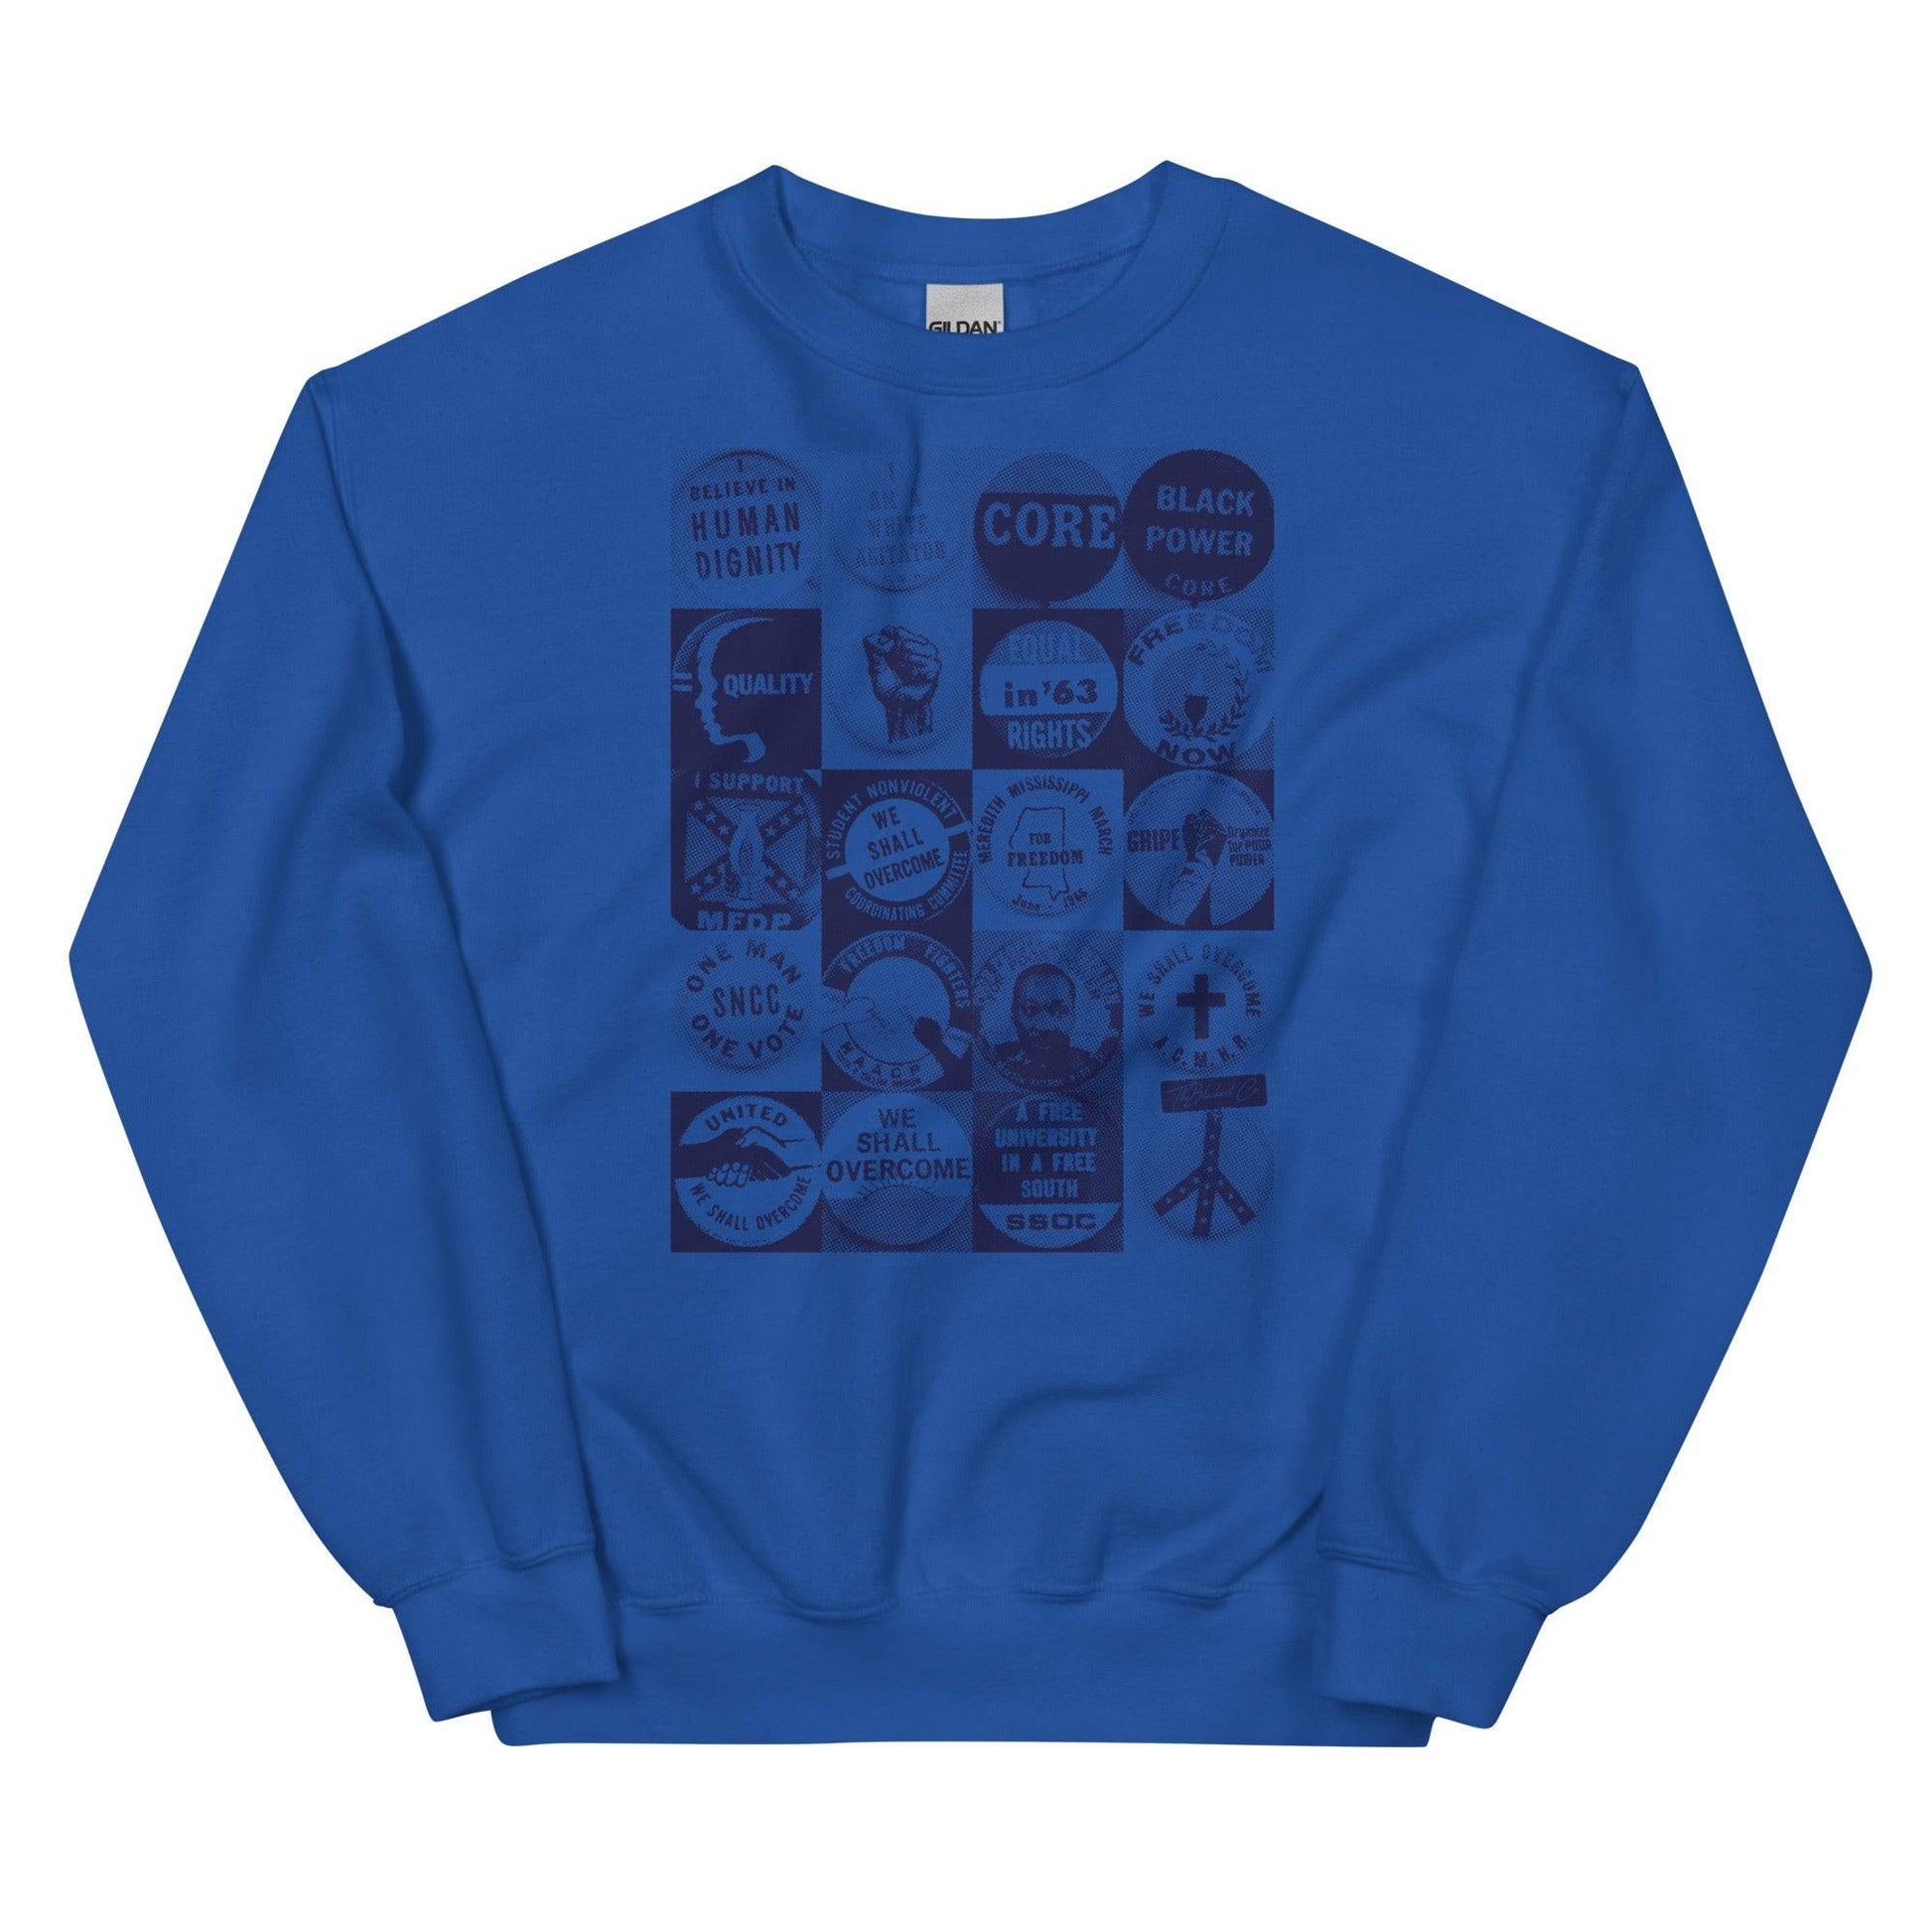 a blue sweatshirt with civil rights buttons graphics on it